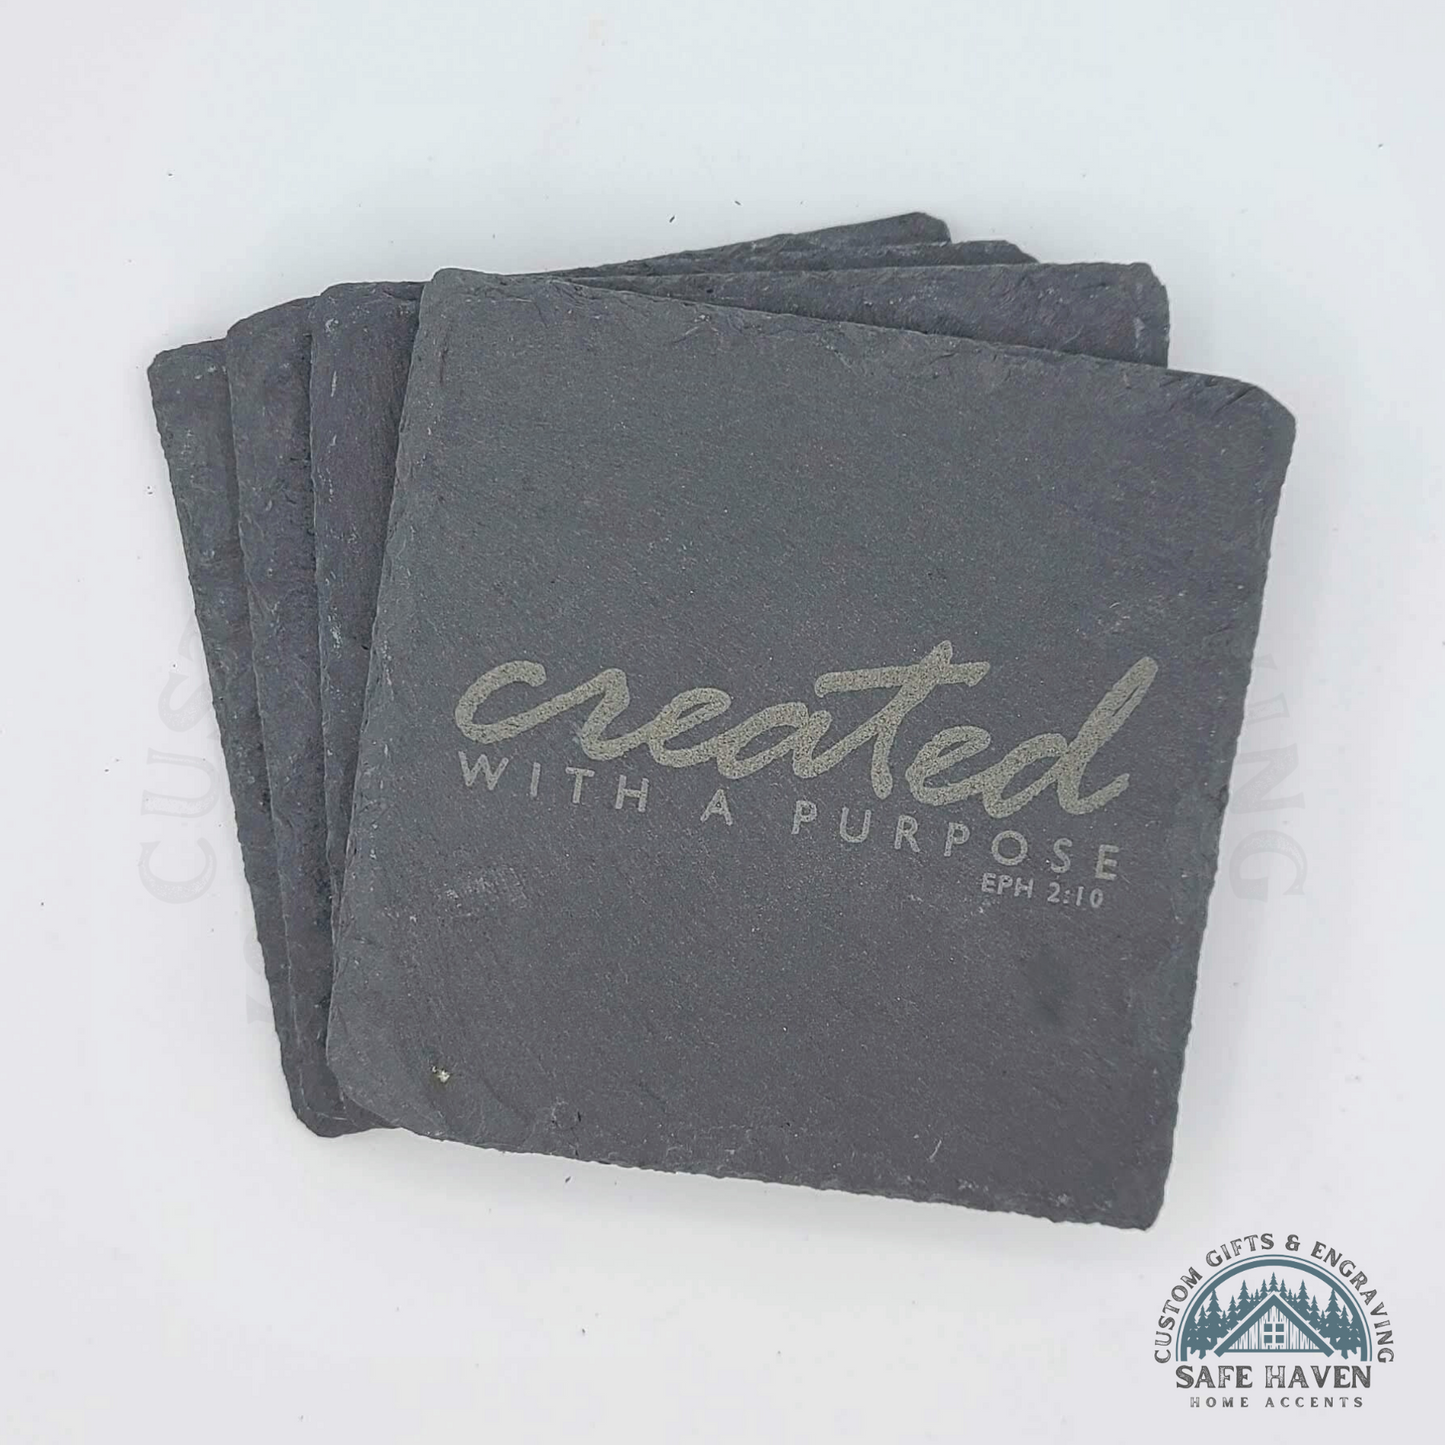 Words of Affirmation Coasters